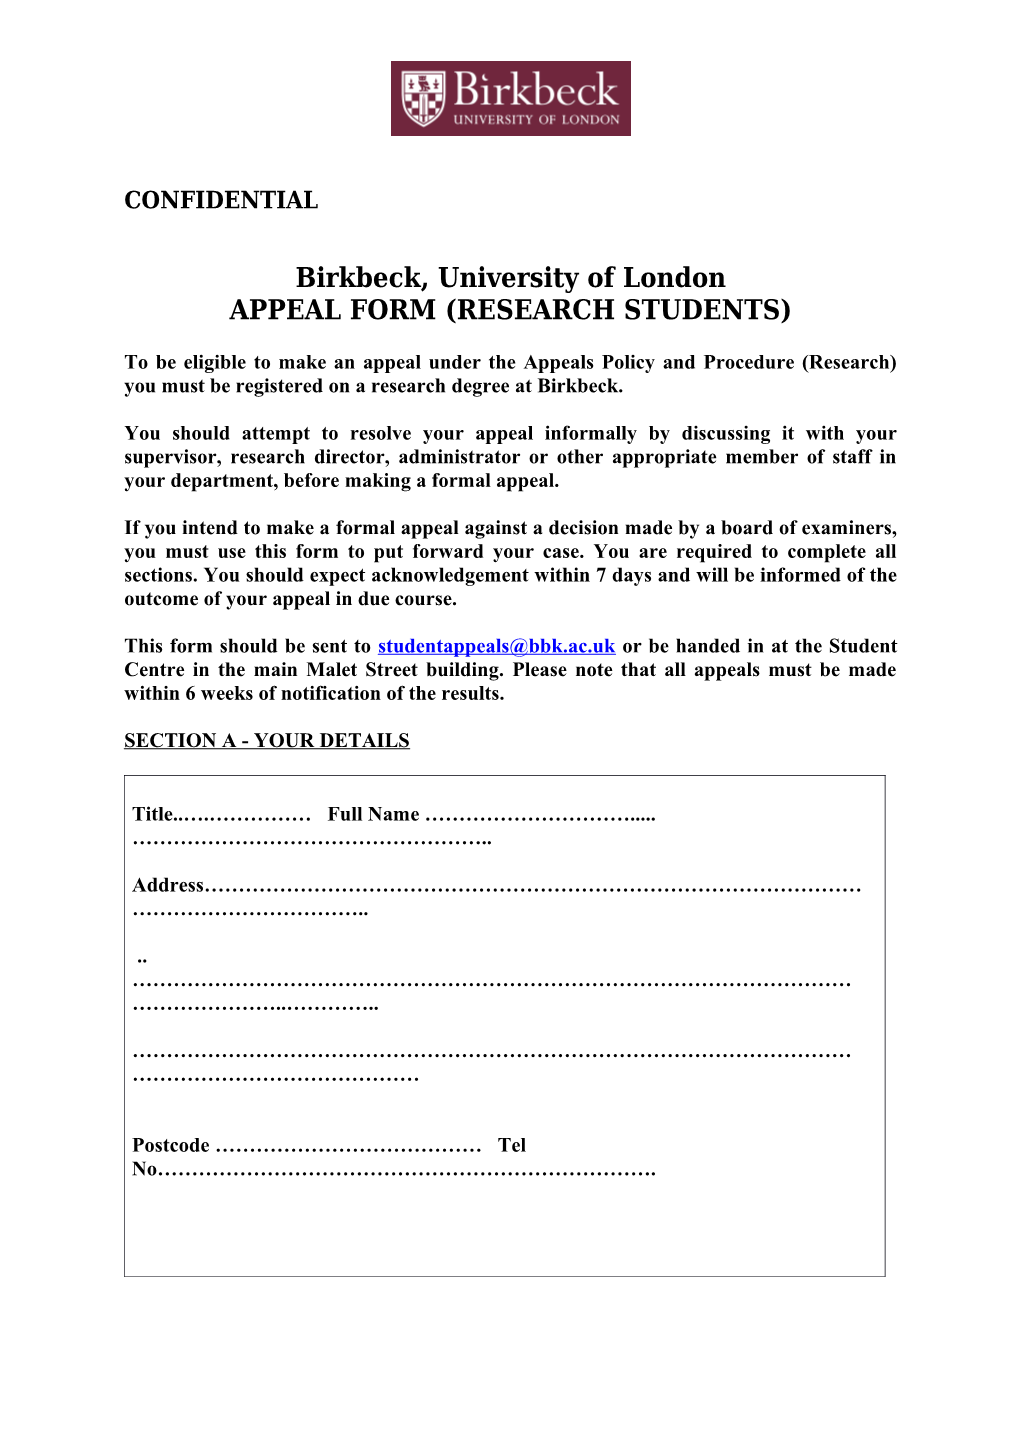 Appeal Form (Research Students)